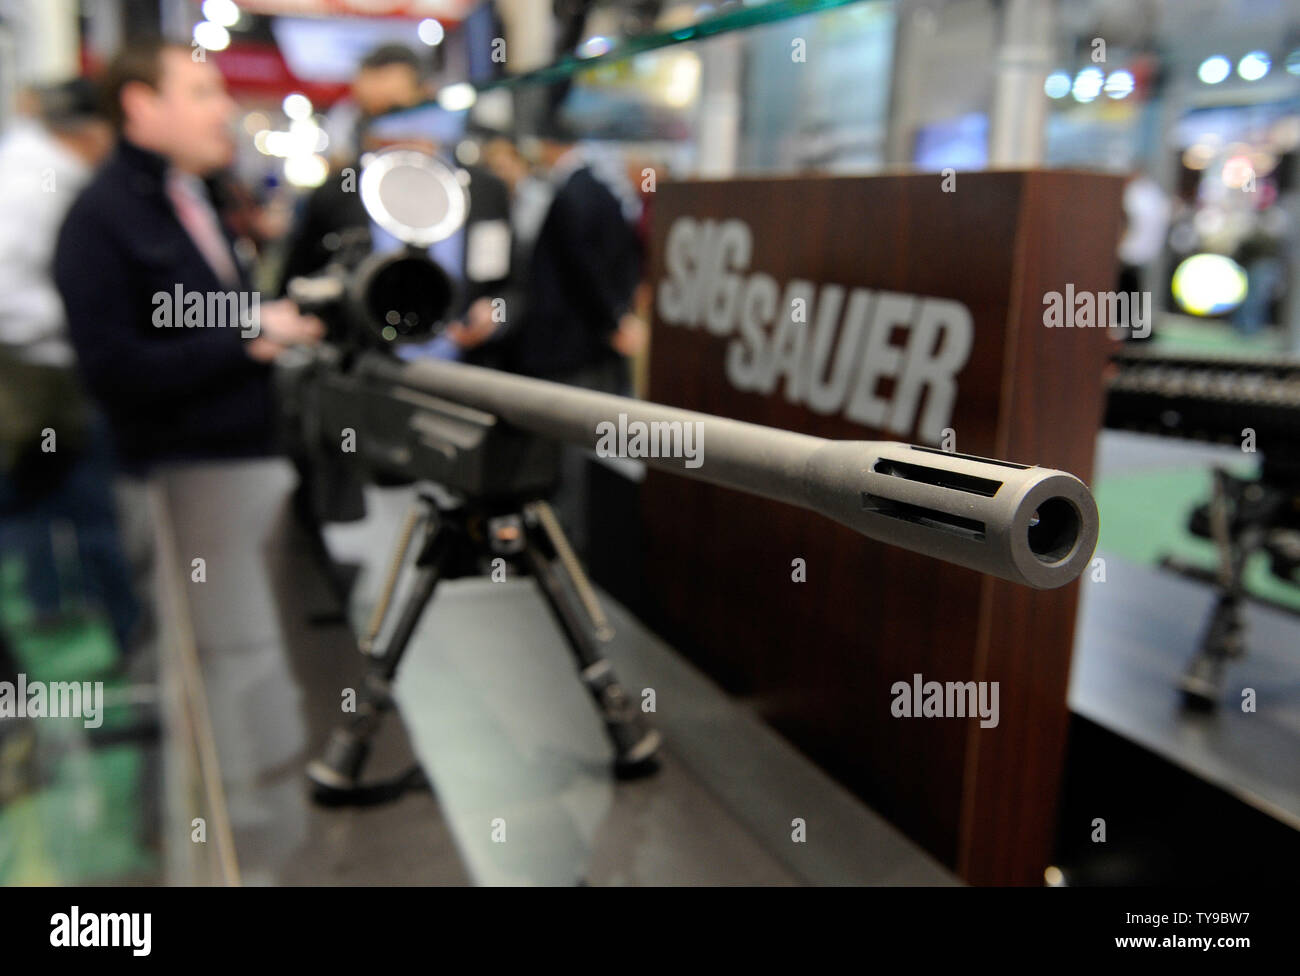 A SSG 3000 high-powered rifle is on display at the Sig Sauer booth at the National Shooting Sports Foundation's 35th annual Shooting, Hunting, Outdoor Trade (SHOT) Show at the Sands Expo and Convention Center January 16, 2013 in Las Vegas. The SHOT Show is the largest annual gathering of shooting professionals with more than 1,600 exhibitors and 60,000 attendees expected.  UPI/David Becker Stock Photo